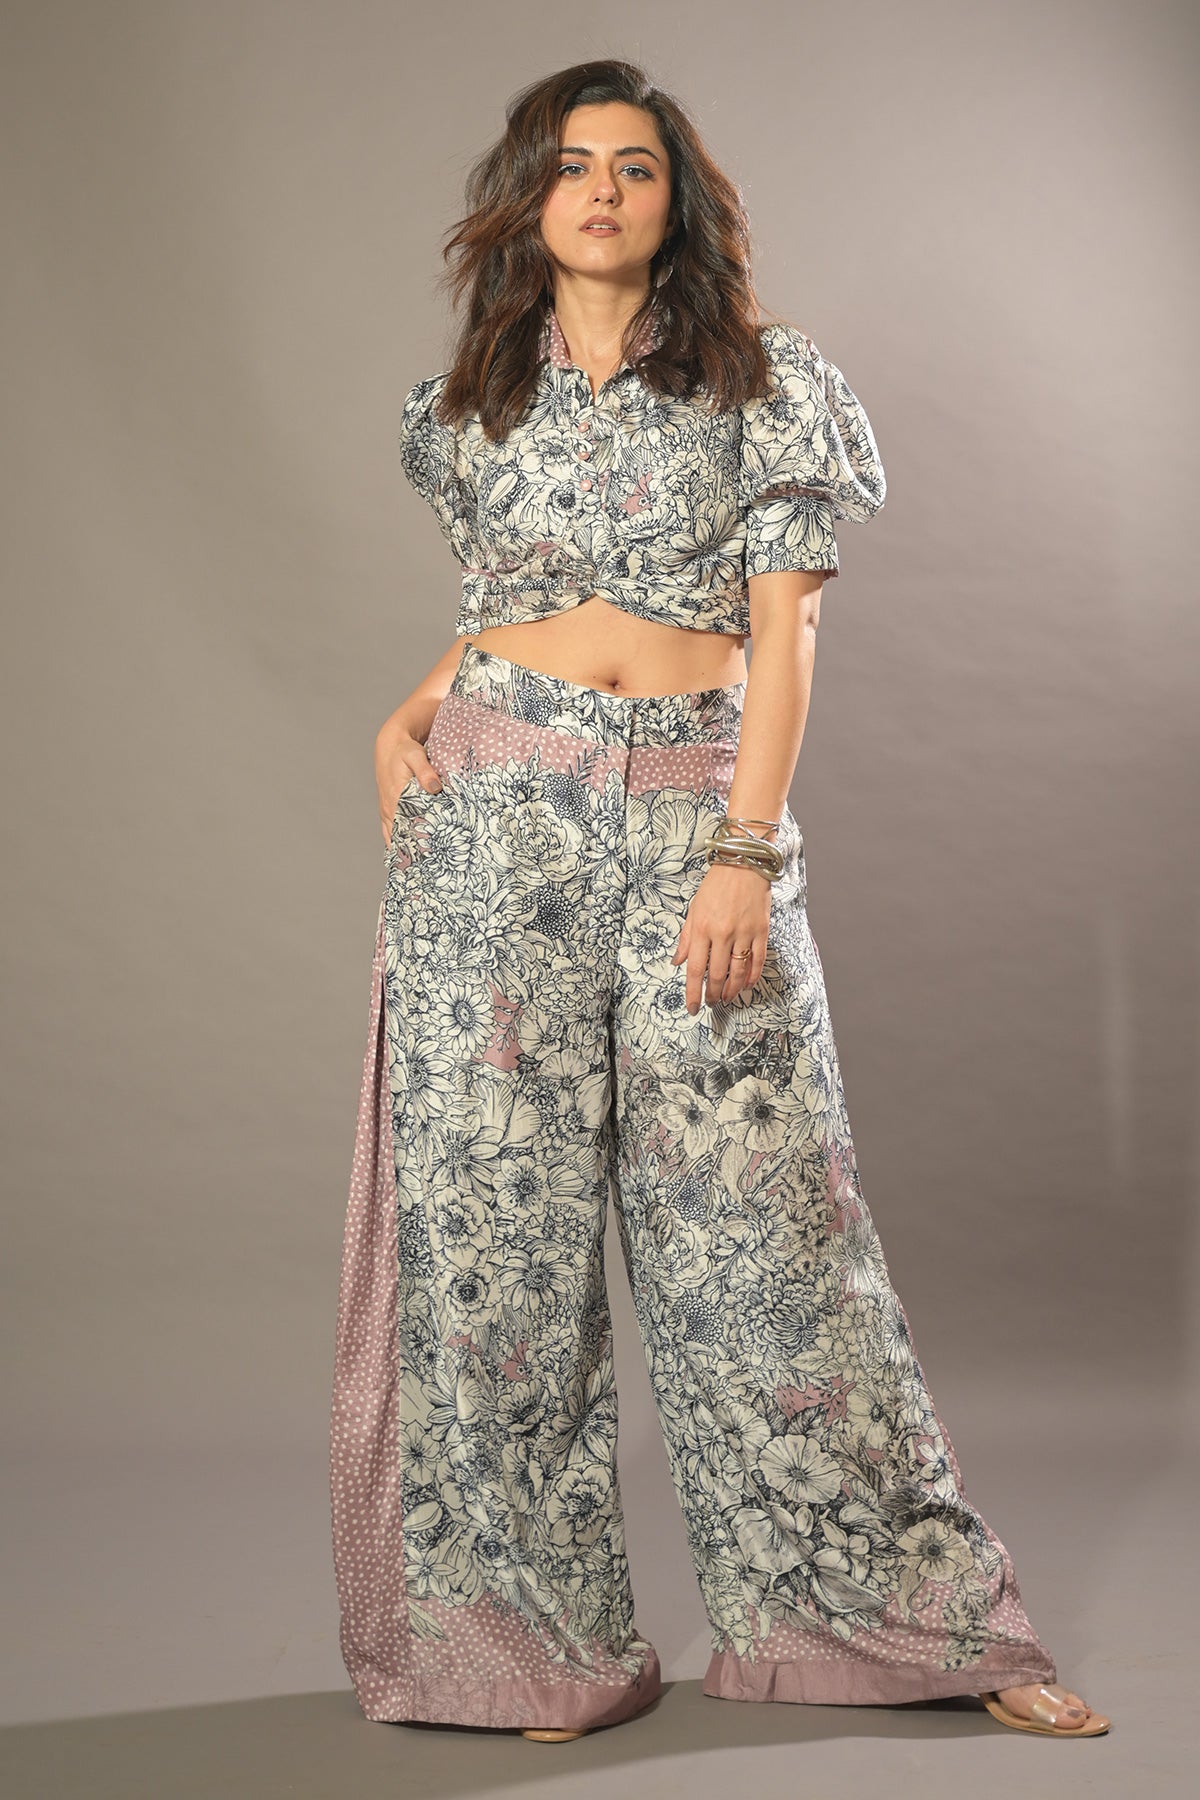 Ridhi Dogra in Twisted Crop Top With Pleated Pant